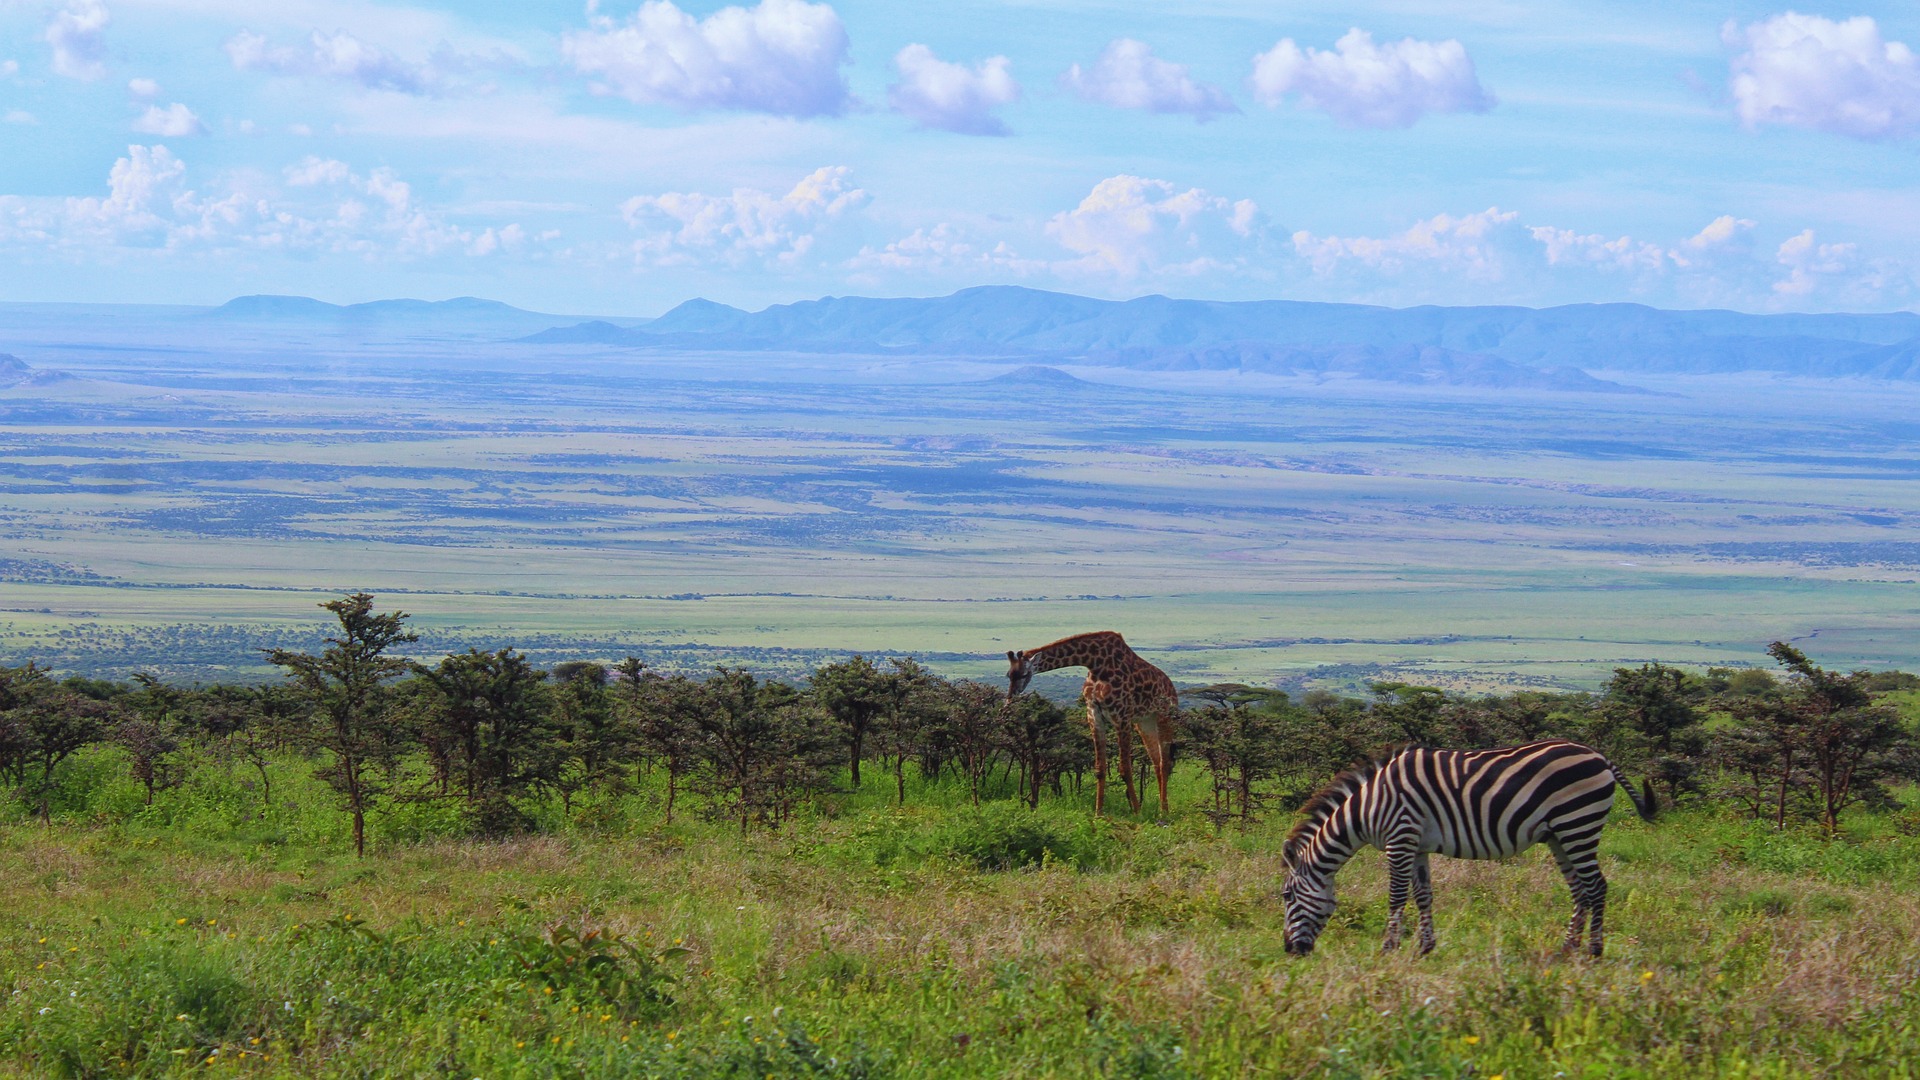 A wildlife scene in Tanzania showing a giraffe in the background and a zebra in the foreground